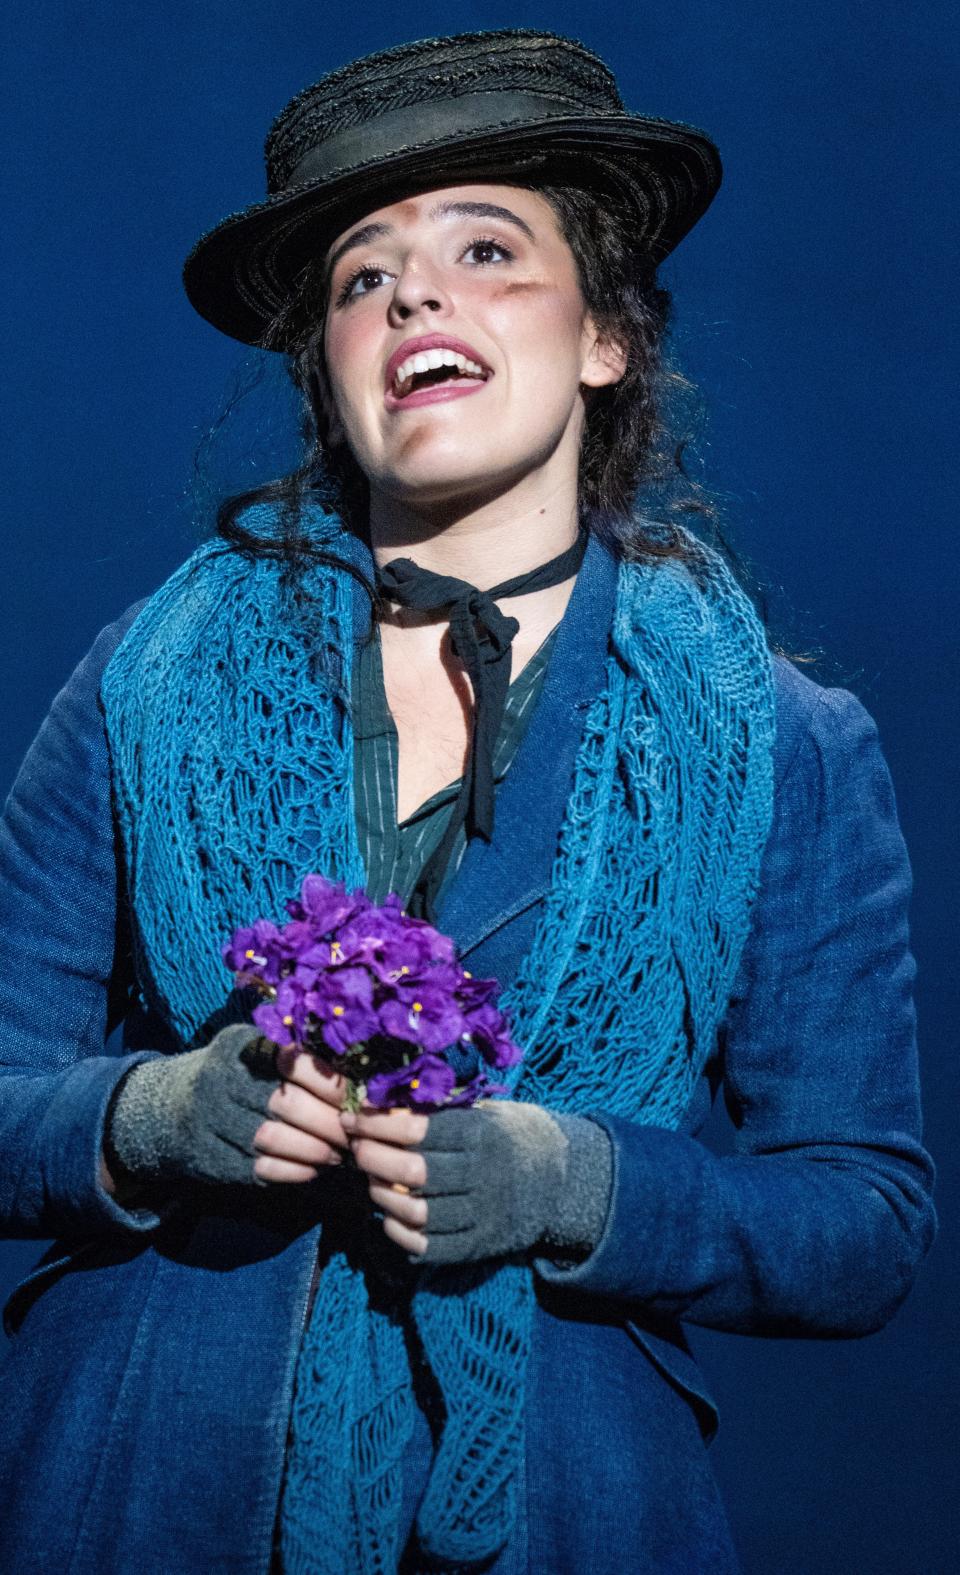 Anette Barrios-Torres stars as Eliza Doolittle in, "My Fair Lady."